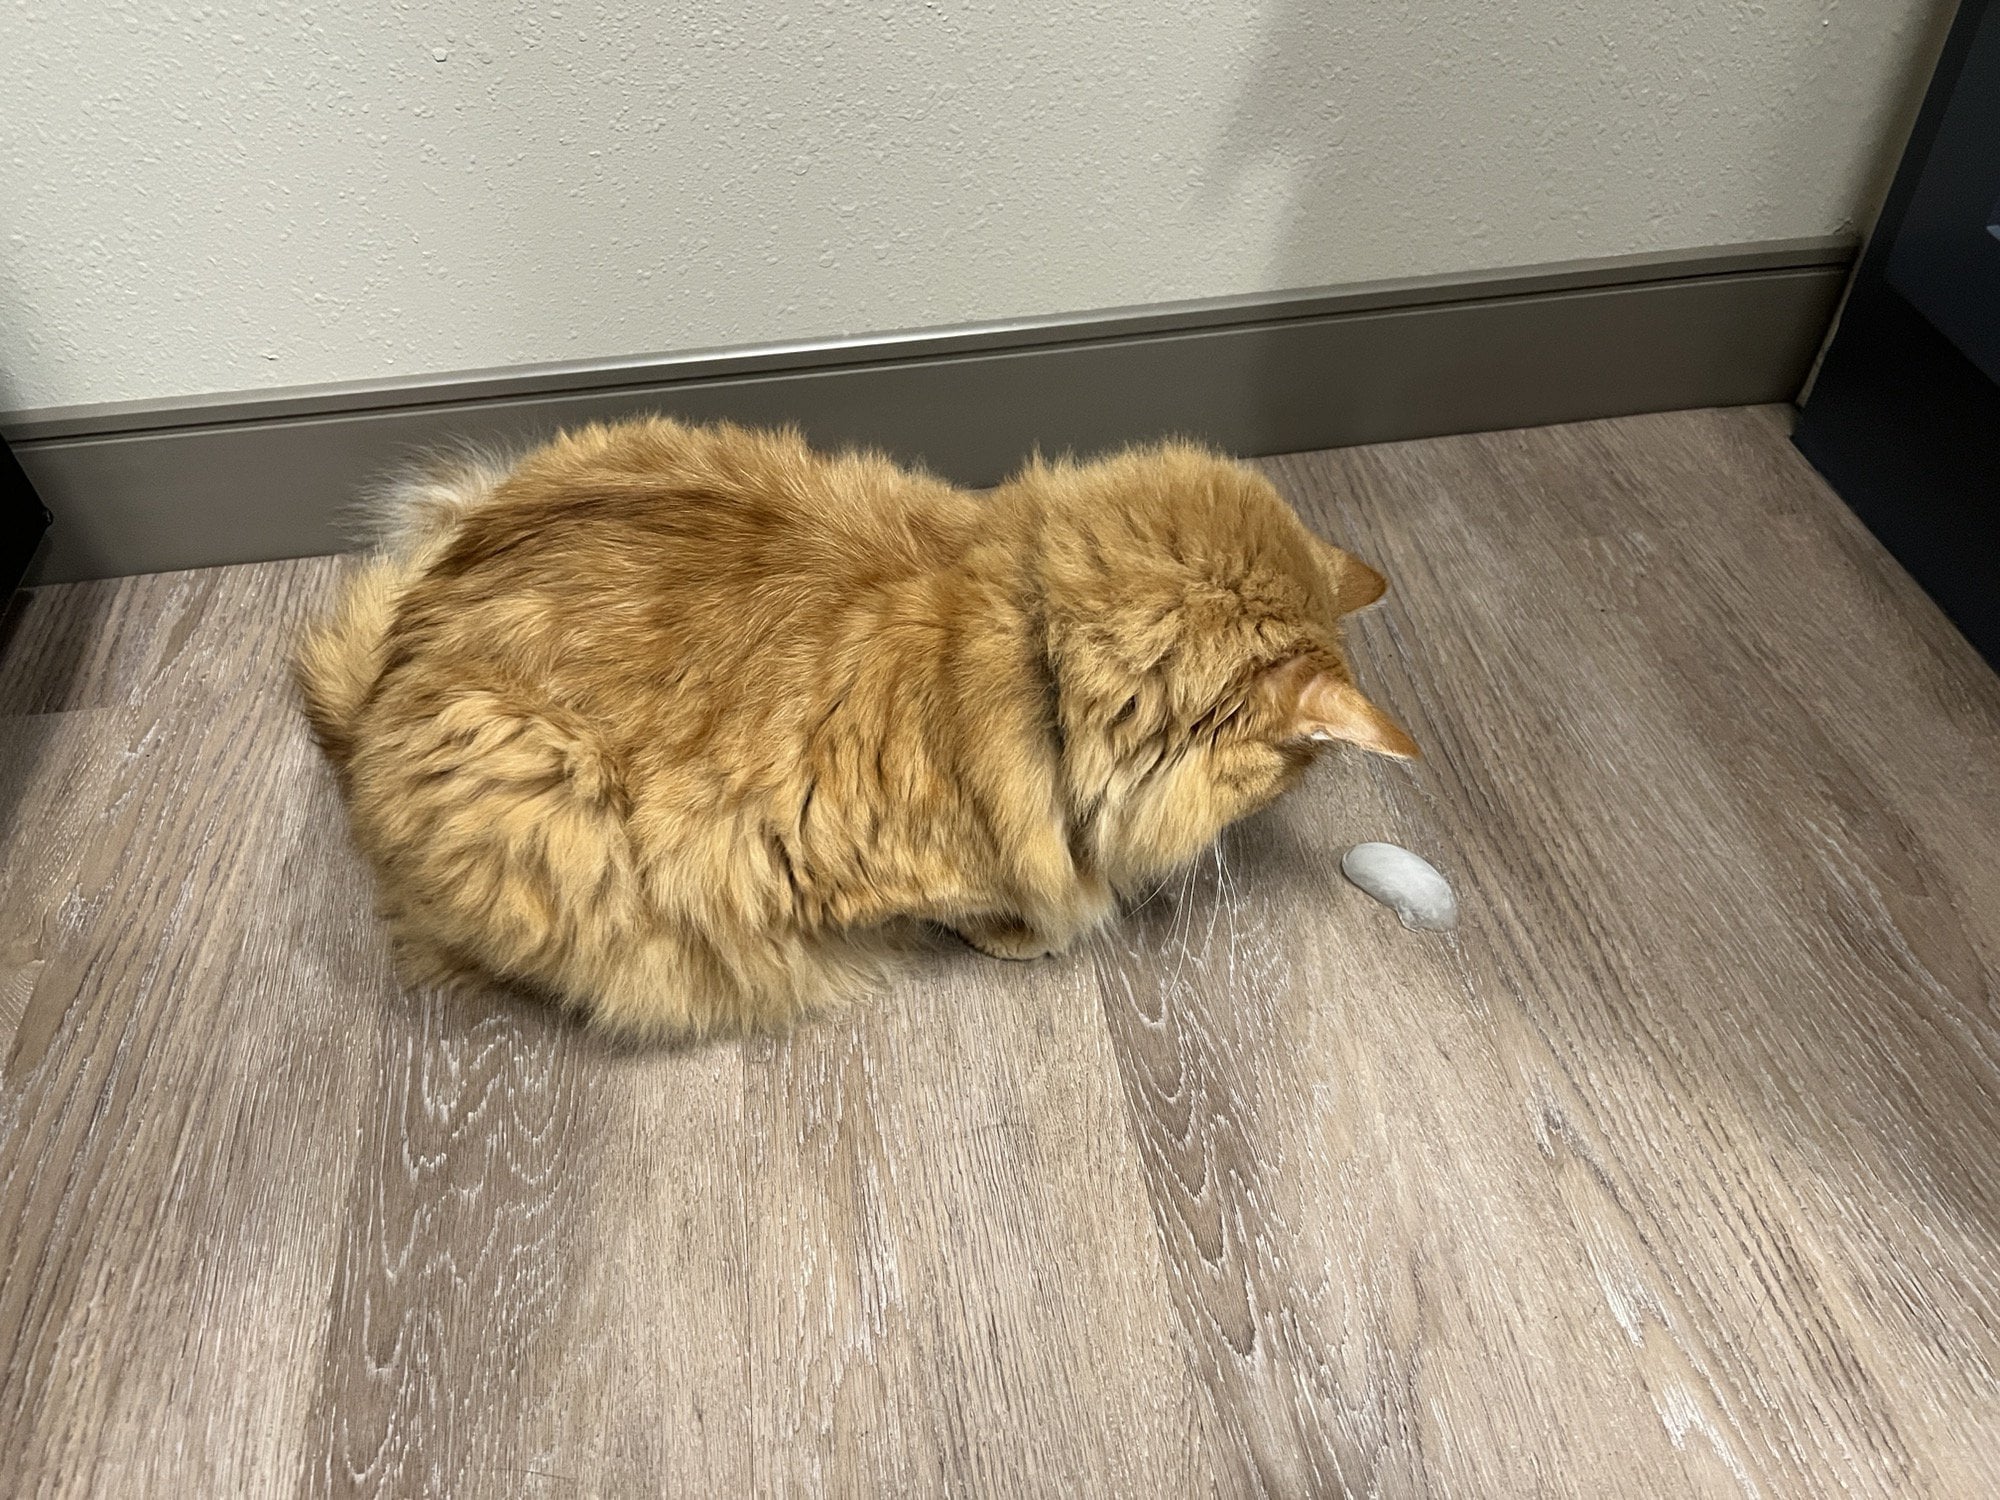 fluffy orange cat staring at an ice cube on the floor